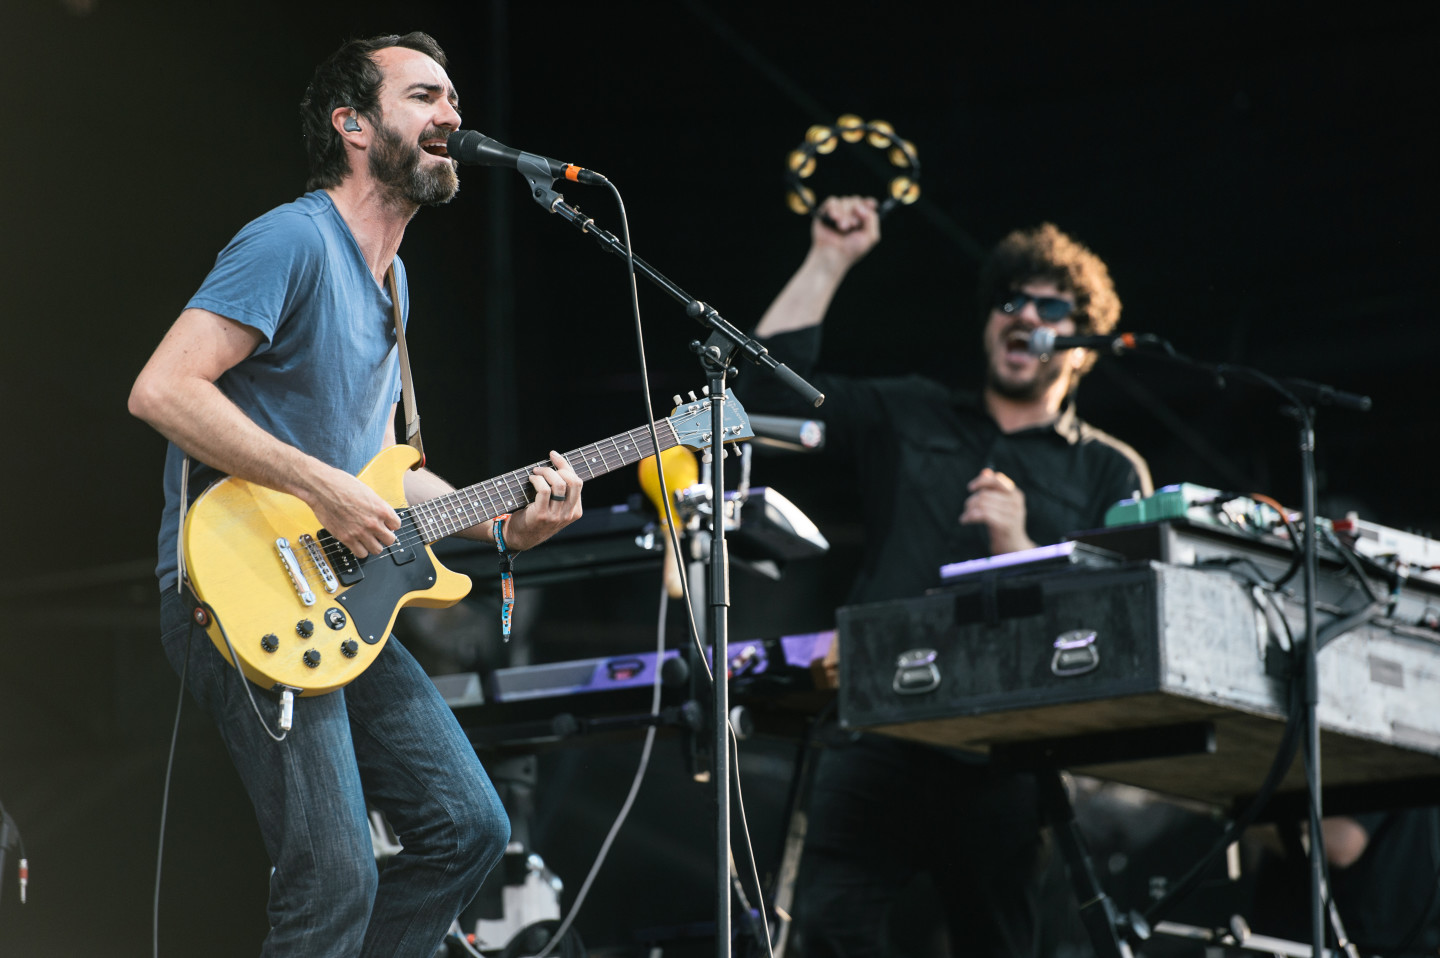 The Shins at Lollapalooza 2012 - Lost In Concert